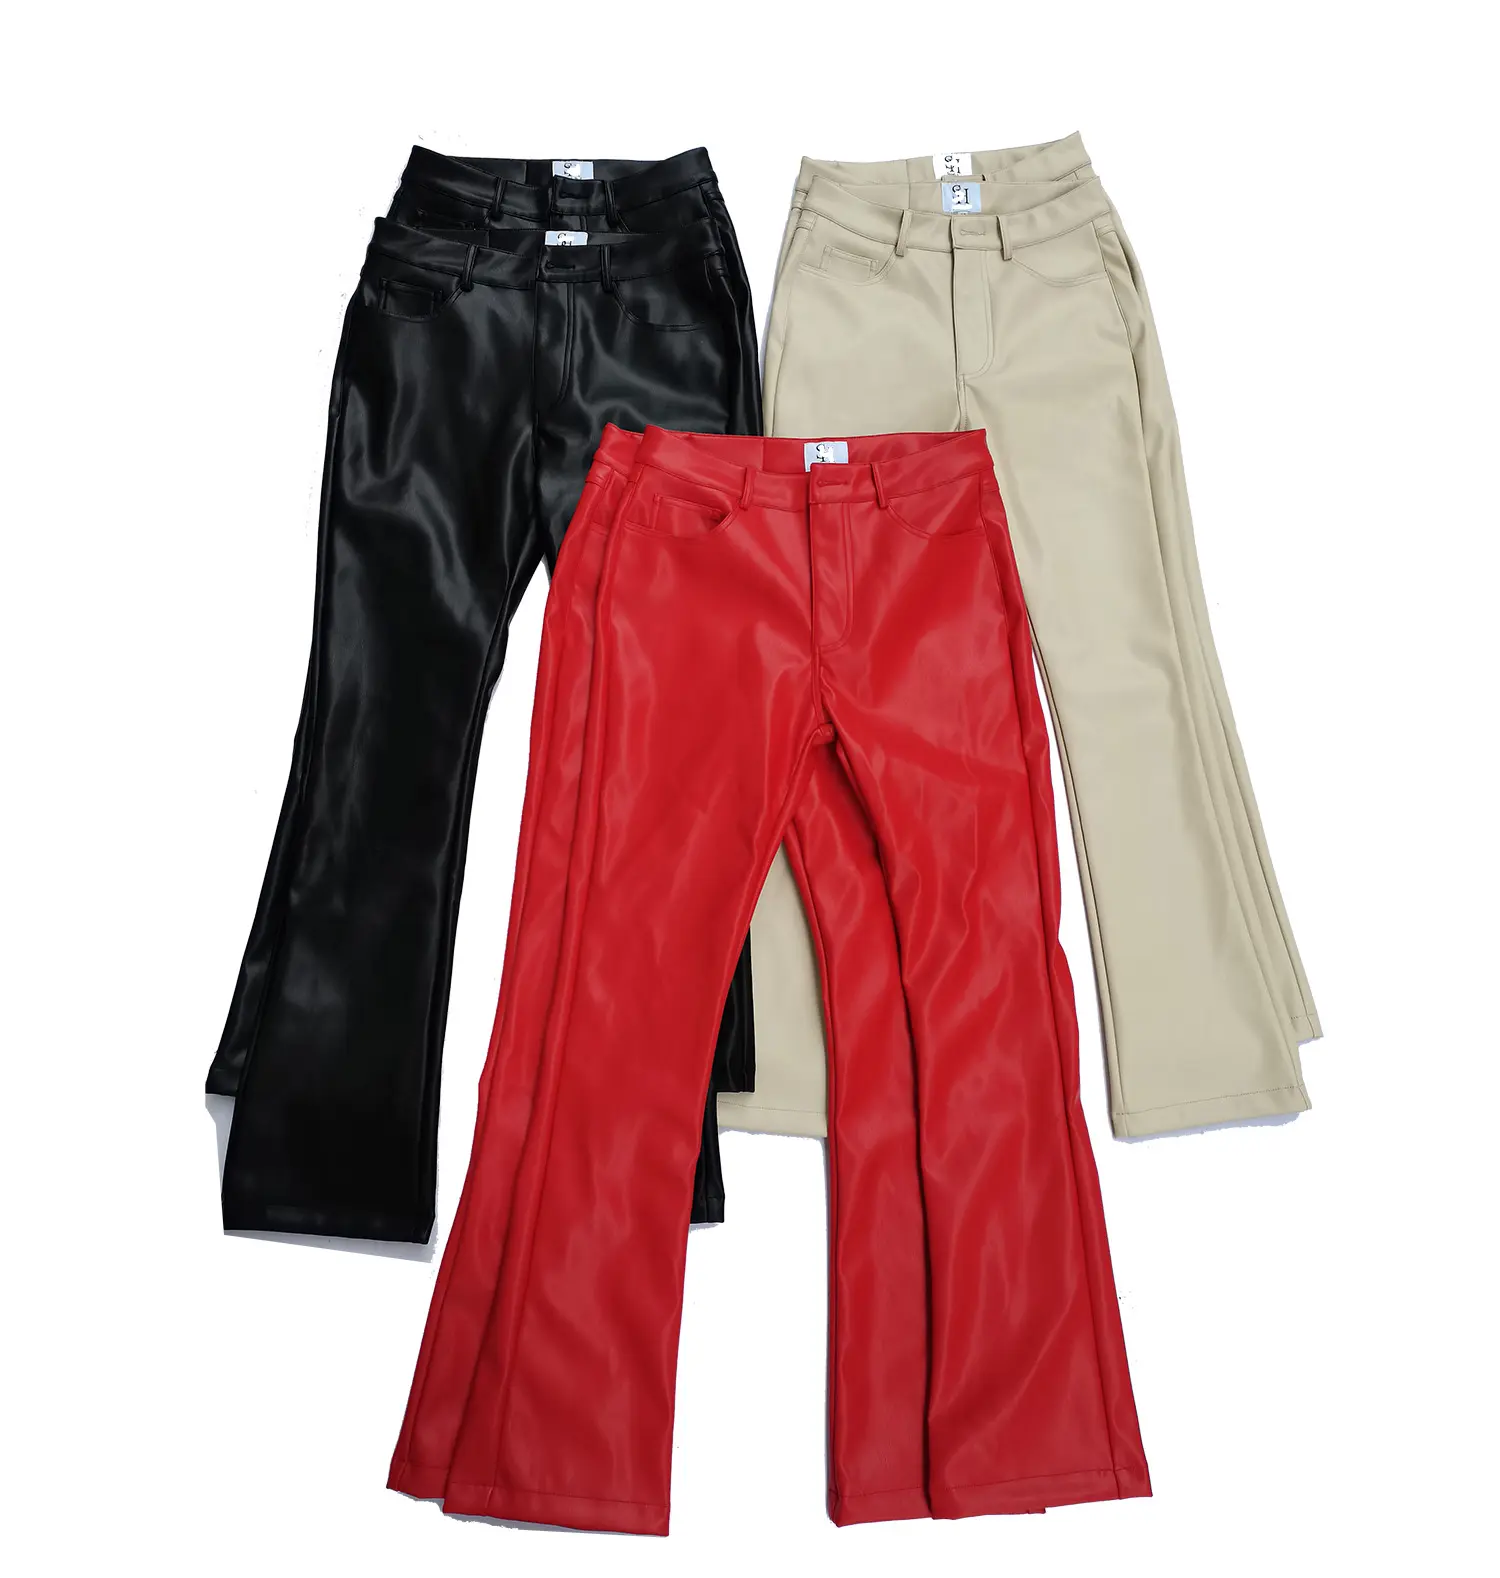 High quality PU leather pants flared pants for men